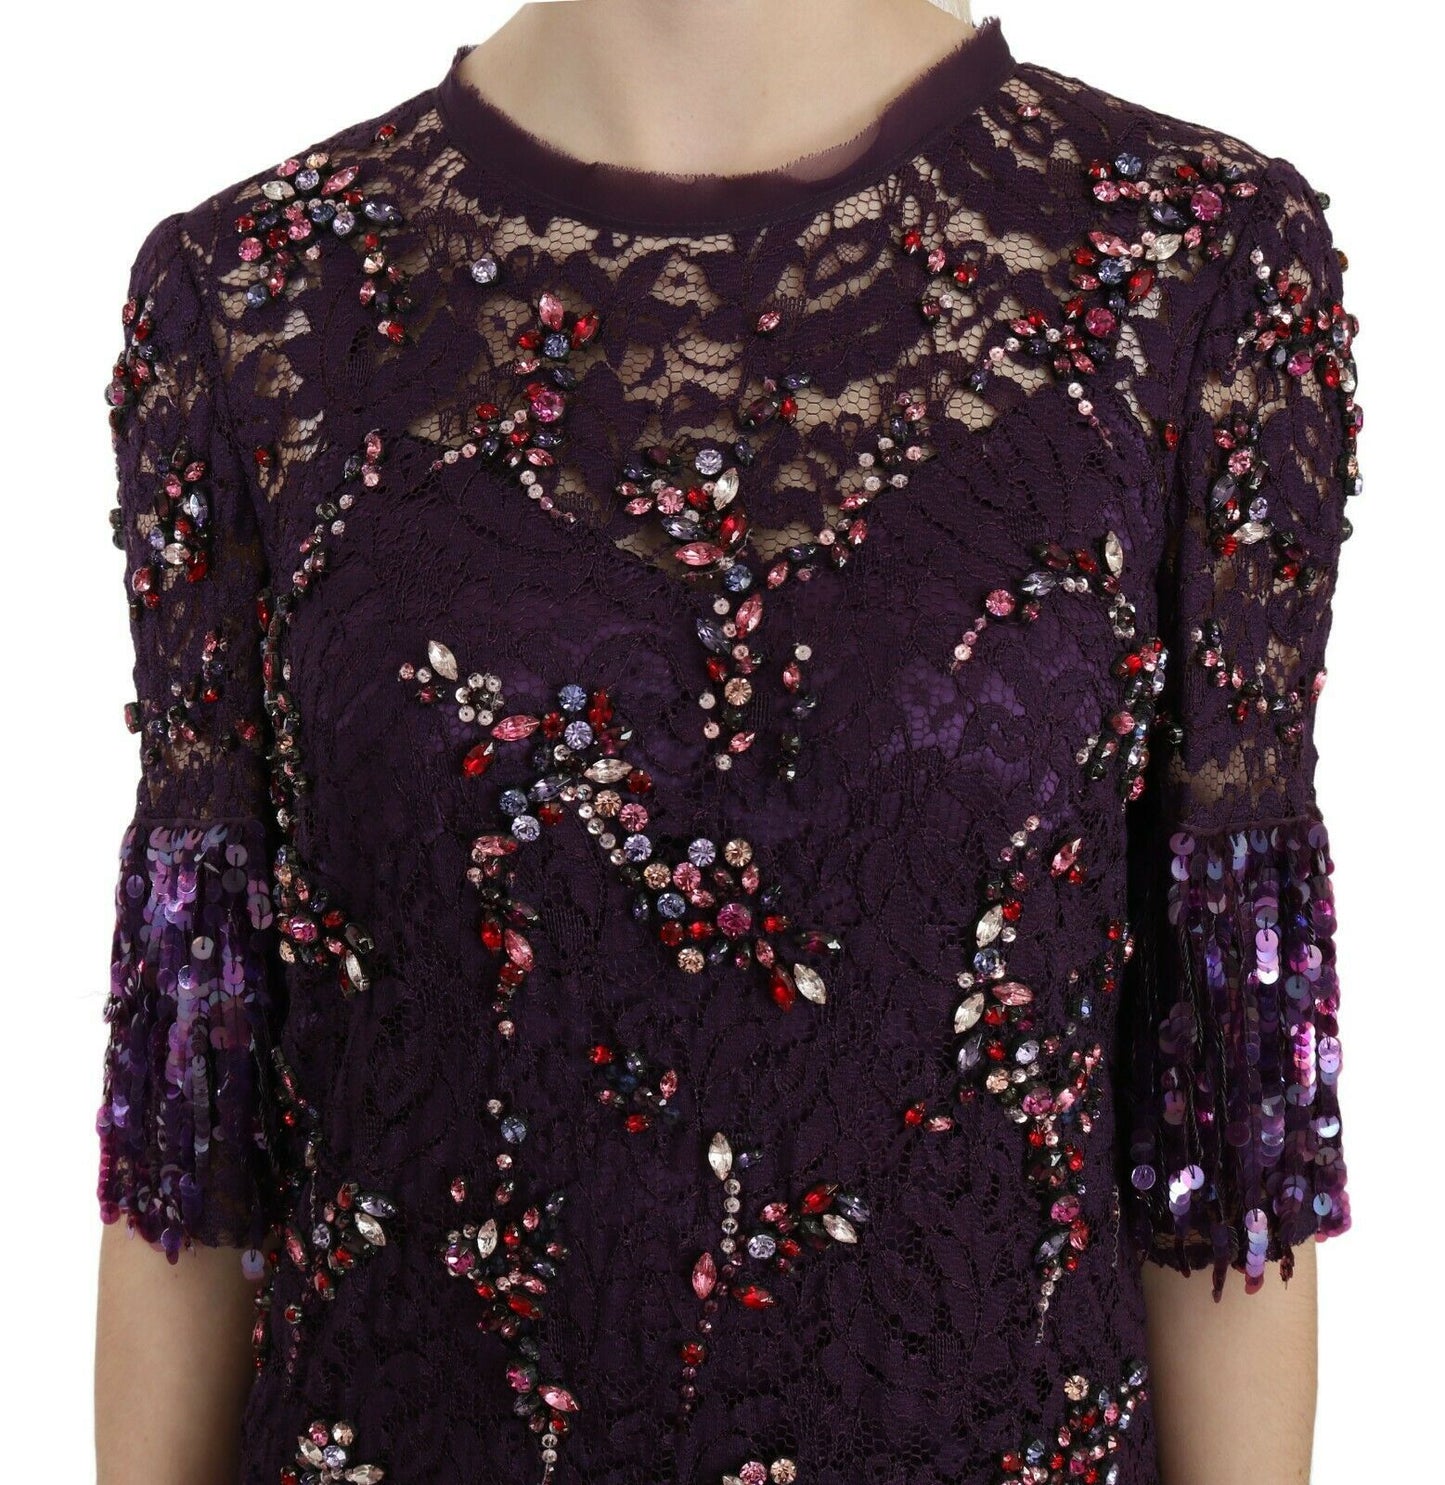 Purple floral lace crystal embedded dress